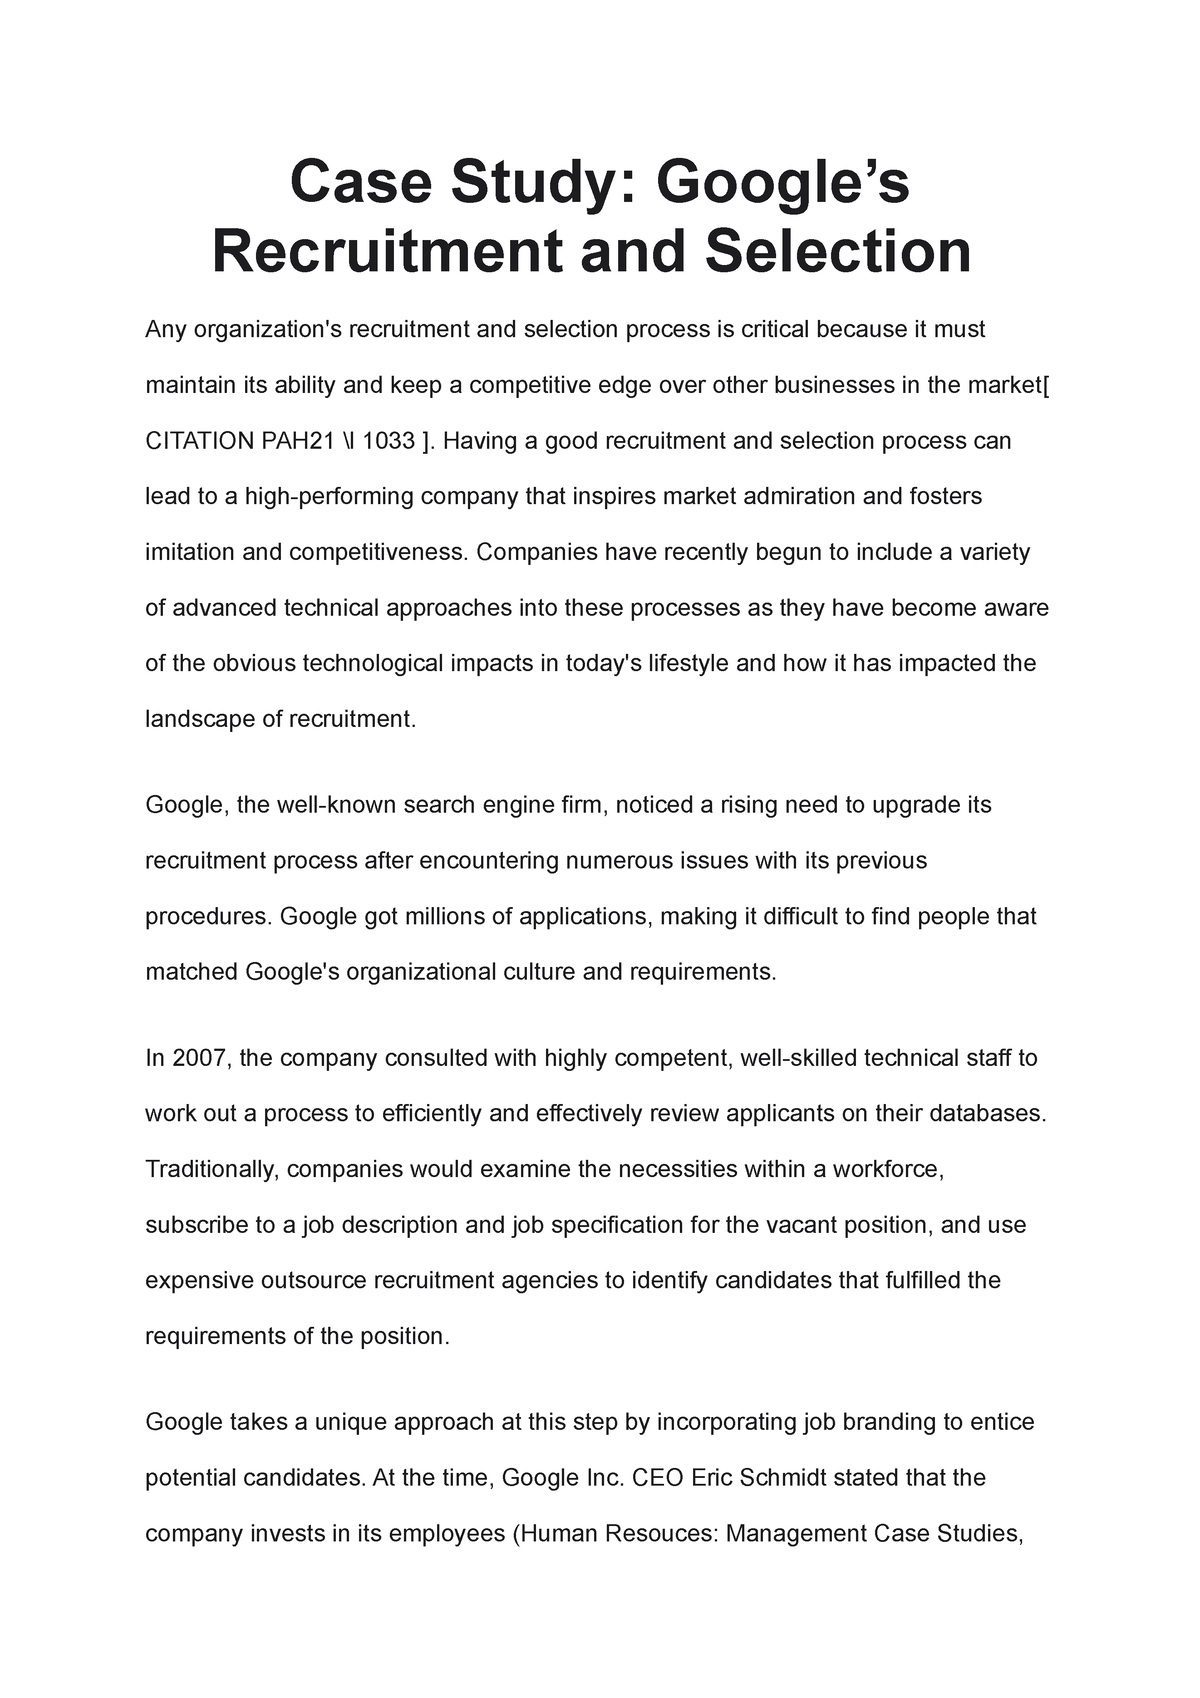 small case study on recruitment and selection